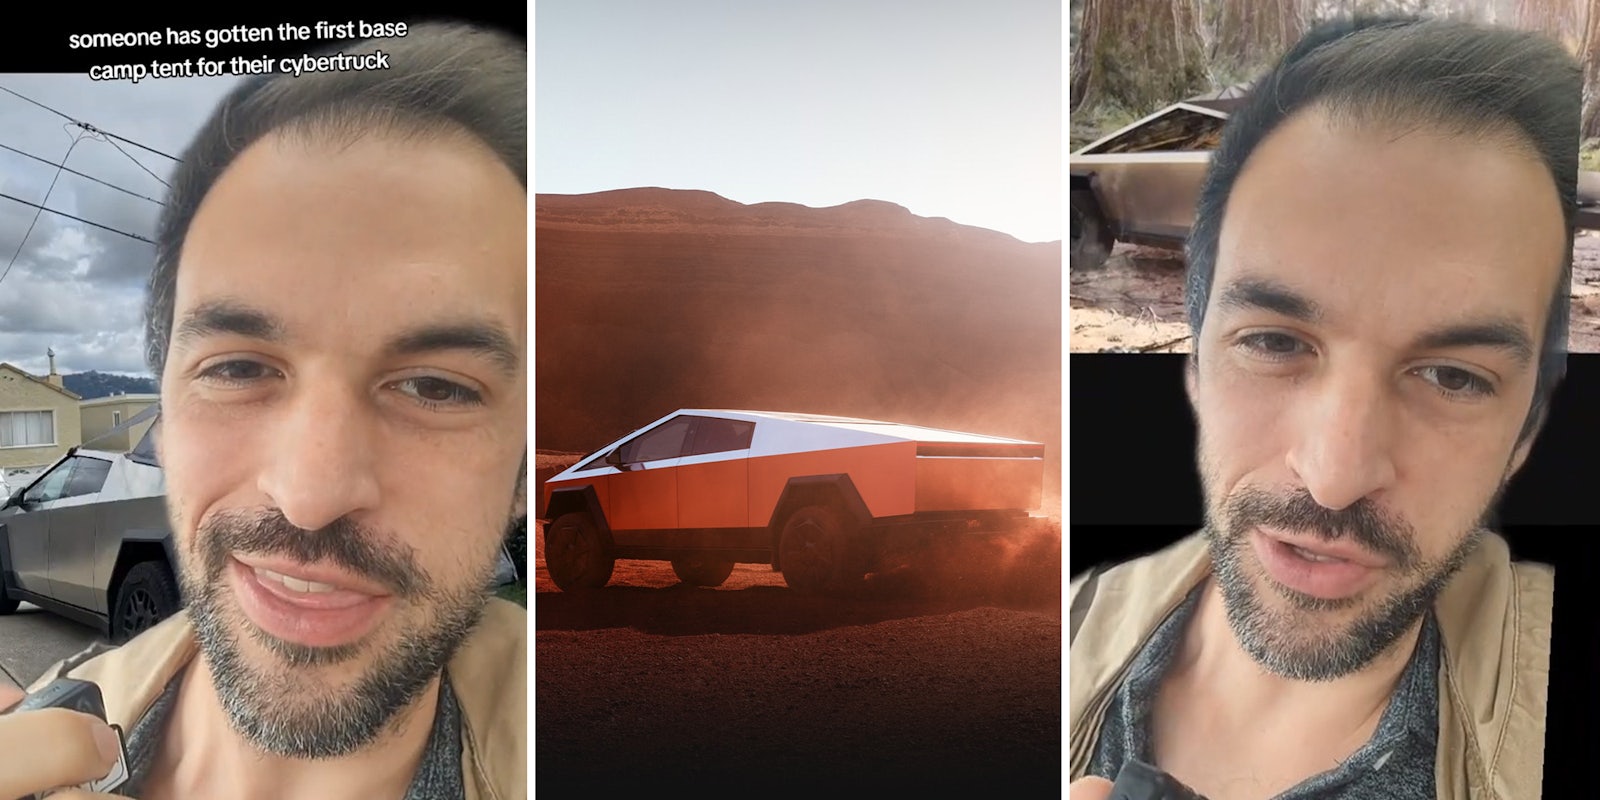 Viewers divided after Tesla Cybertruck owner receives first basecamp tent